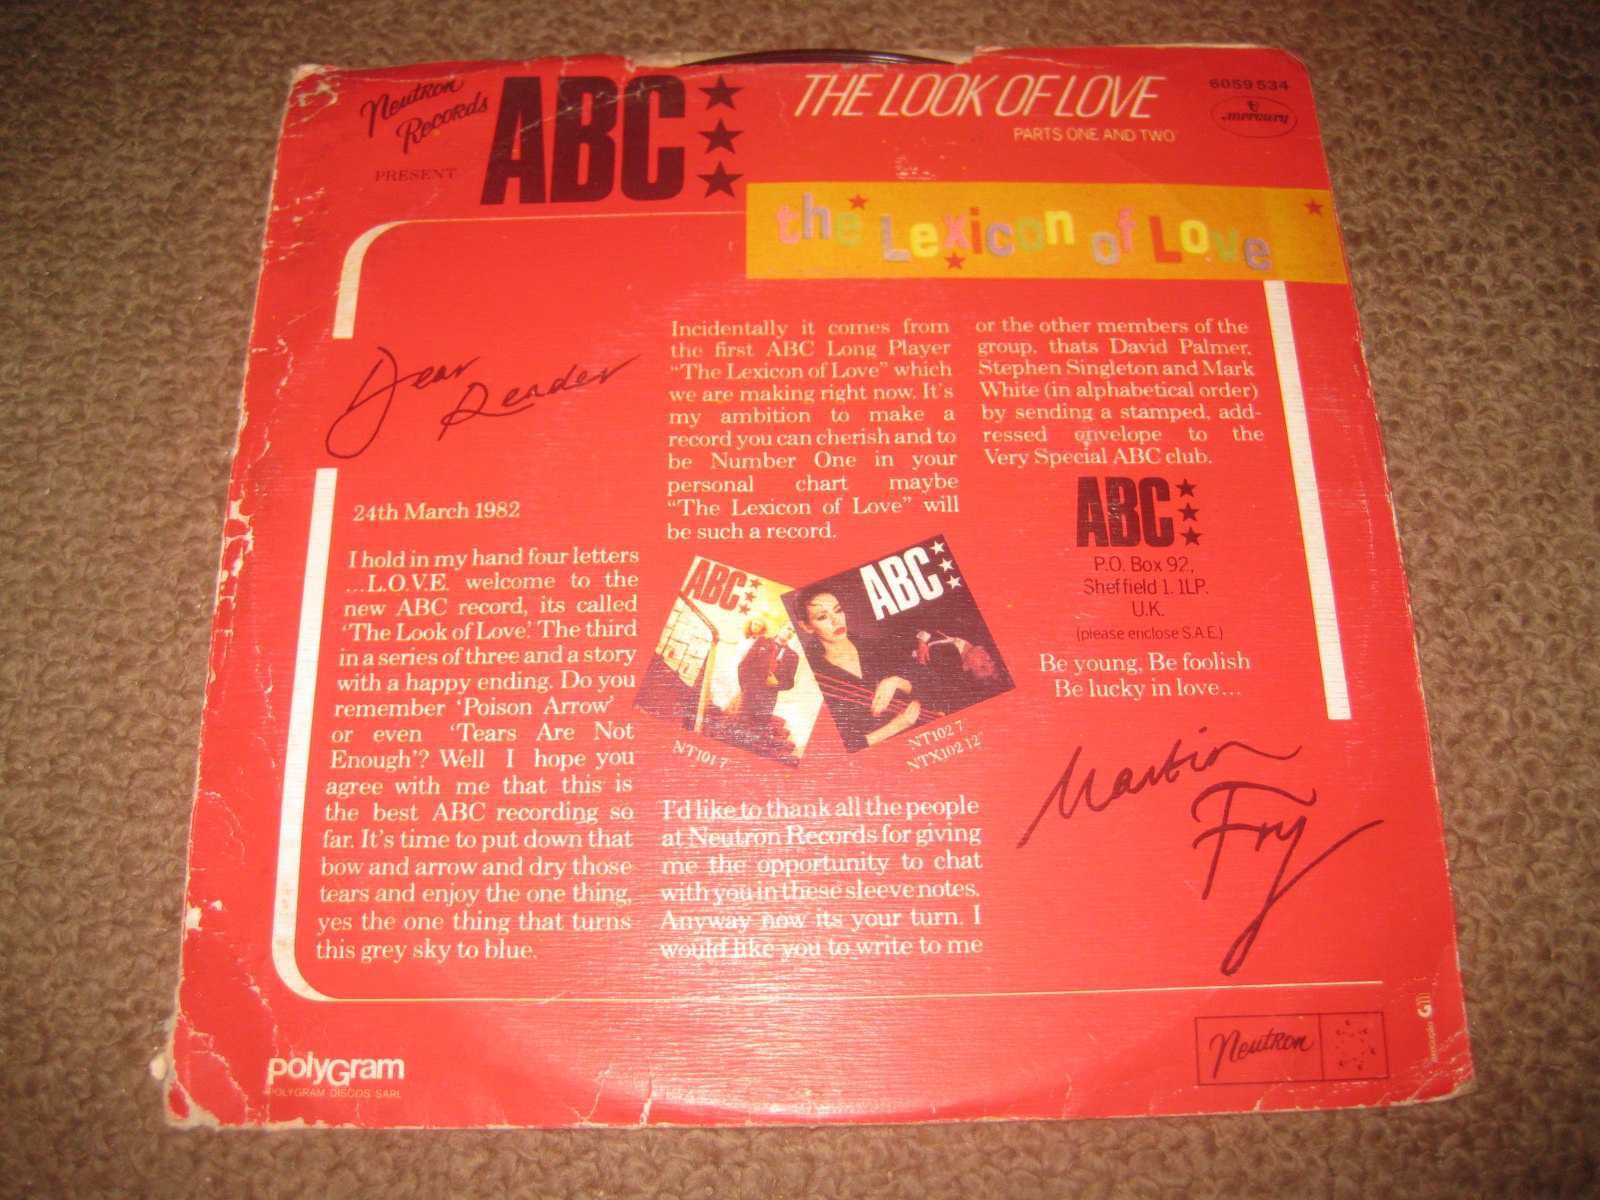 Vinil Single 45 rpm dos ABC "The Look Of Love"